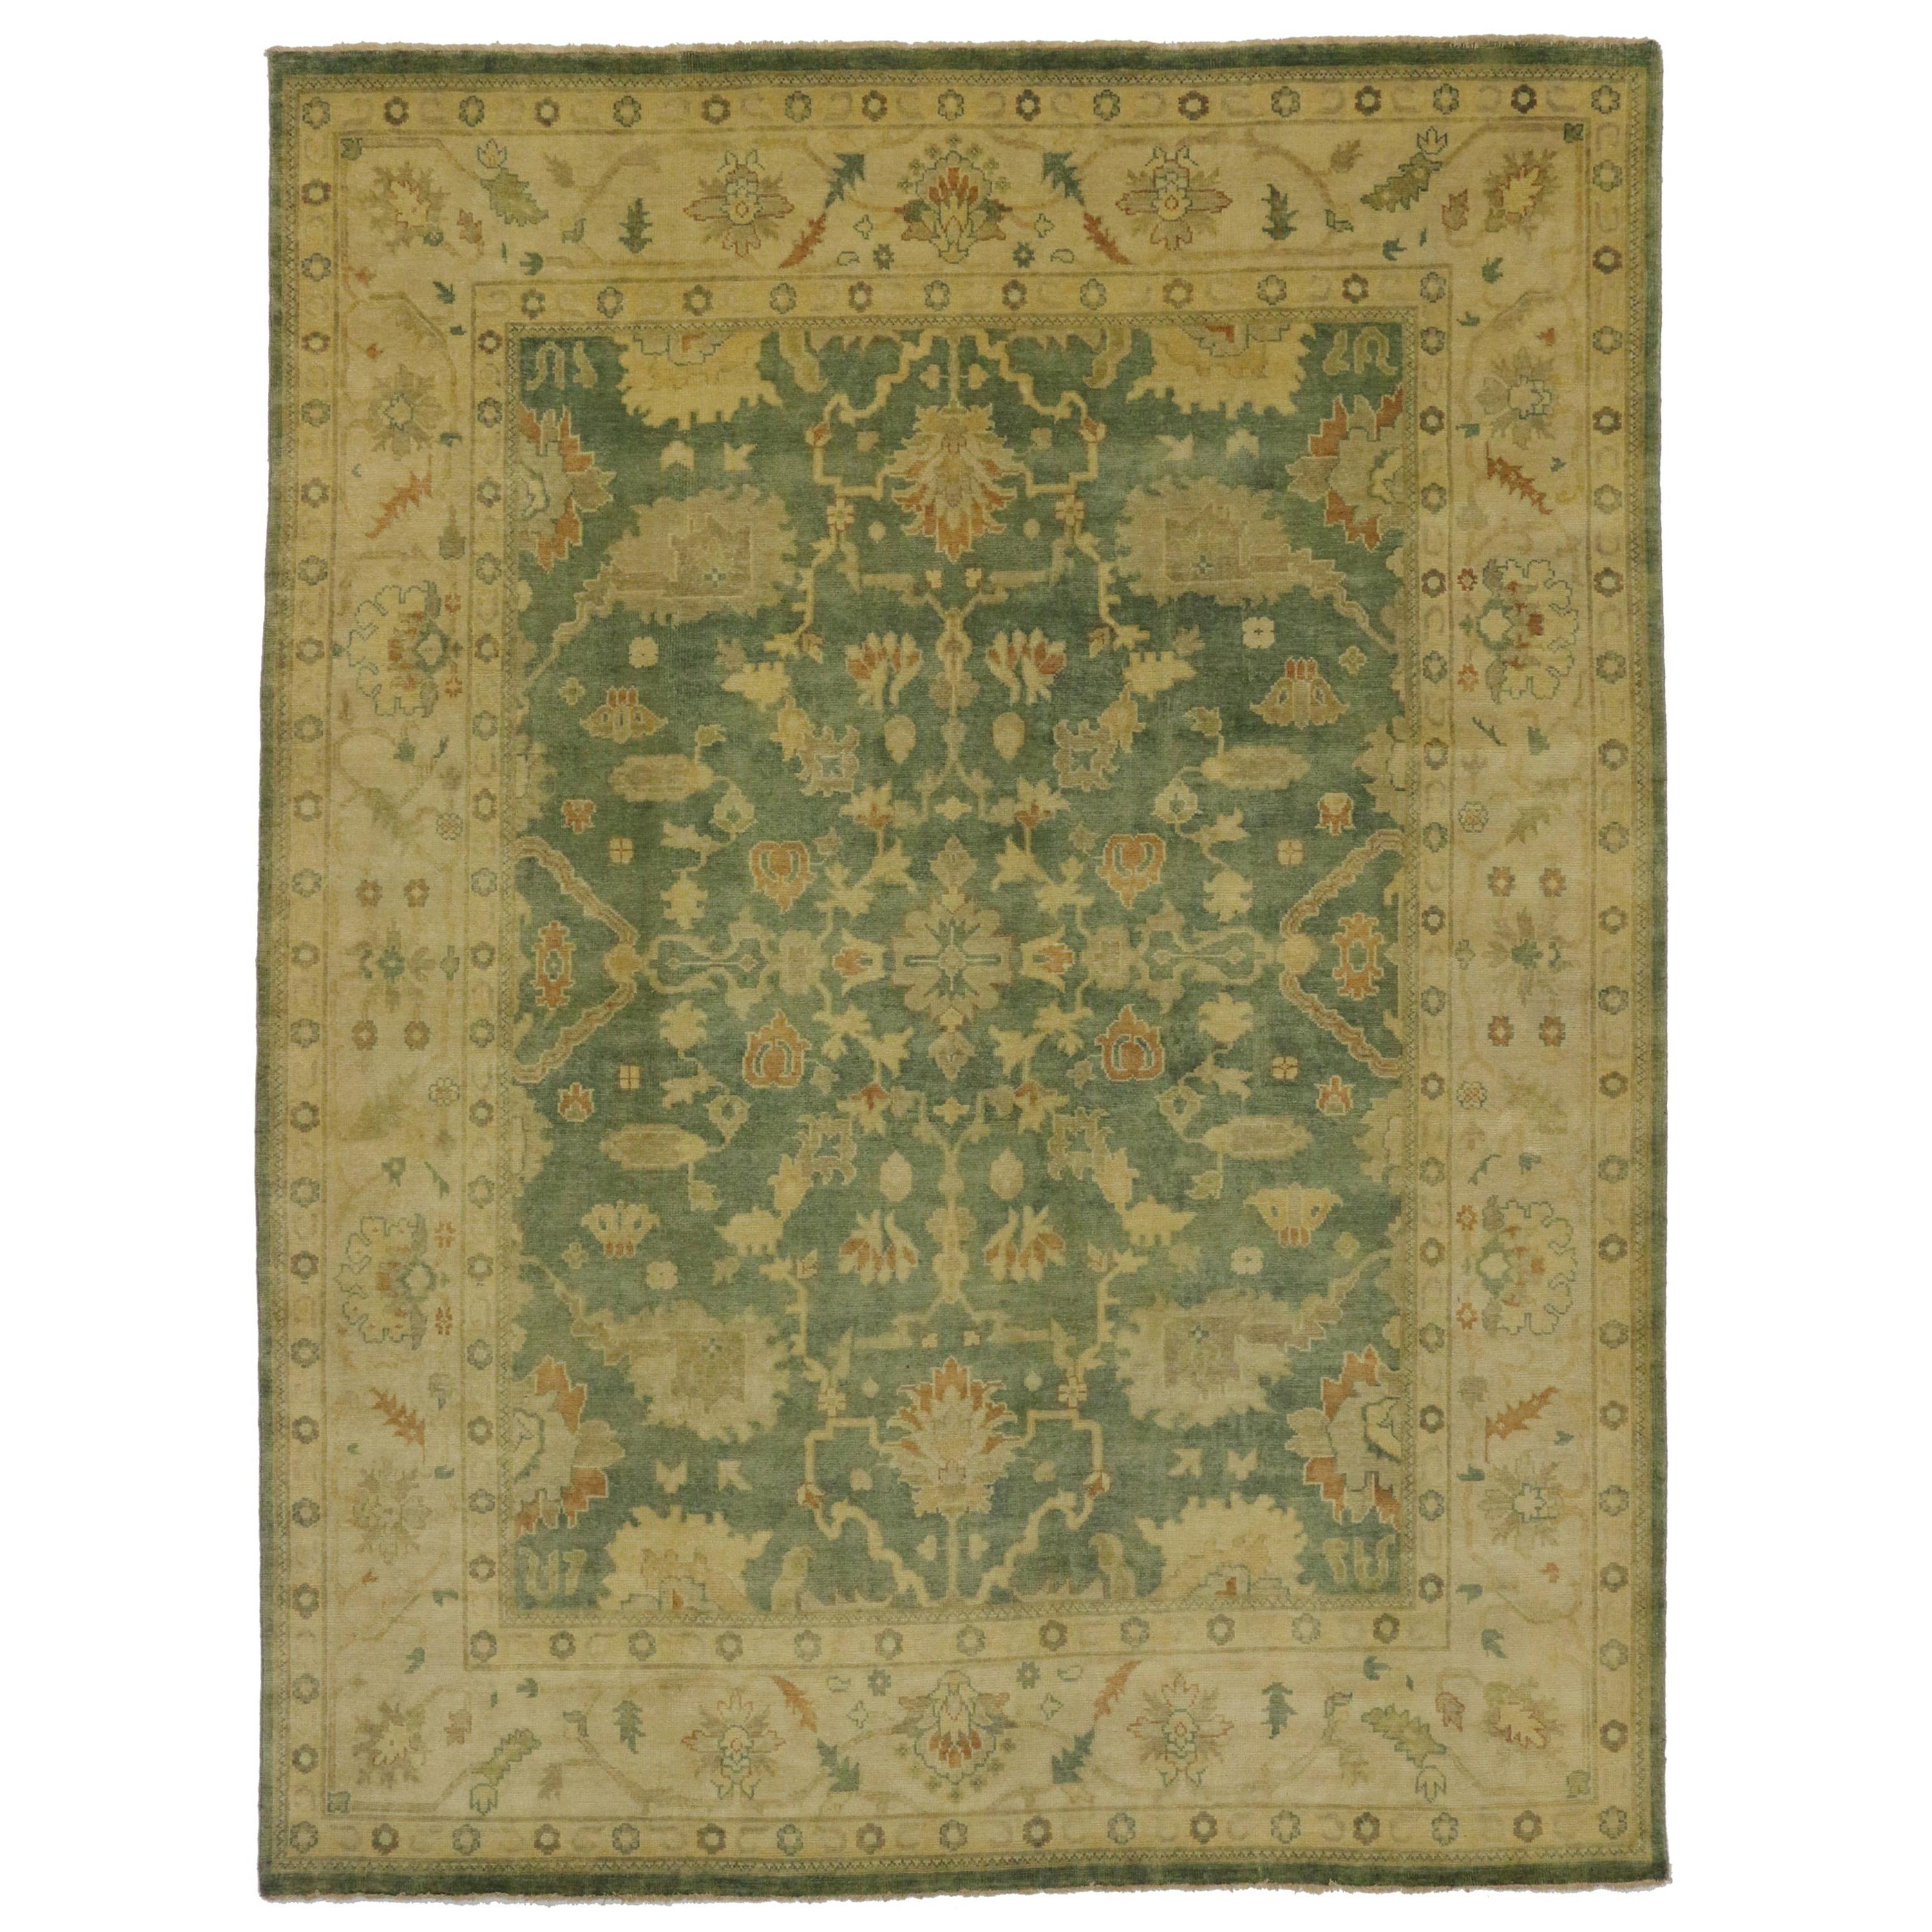 30188, contemporary Indian Oushak style Area rug with Arts & Crafts style. This hand knotted wool contemporary Indian Oushak style area rug features a graceful all-over floral pattern spread across an abrashed field. Large palmettes, vines, tulips,